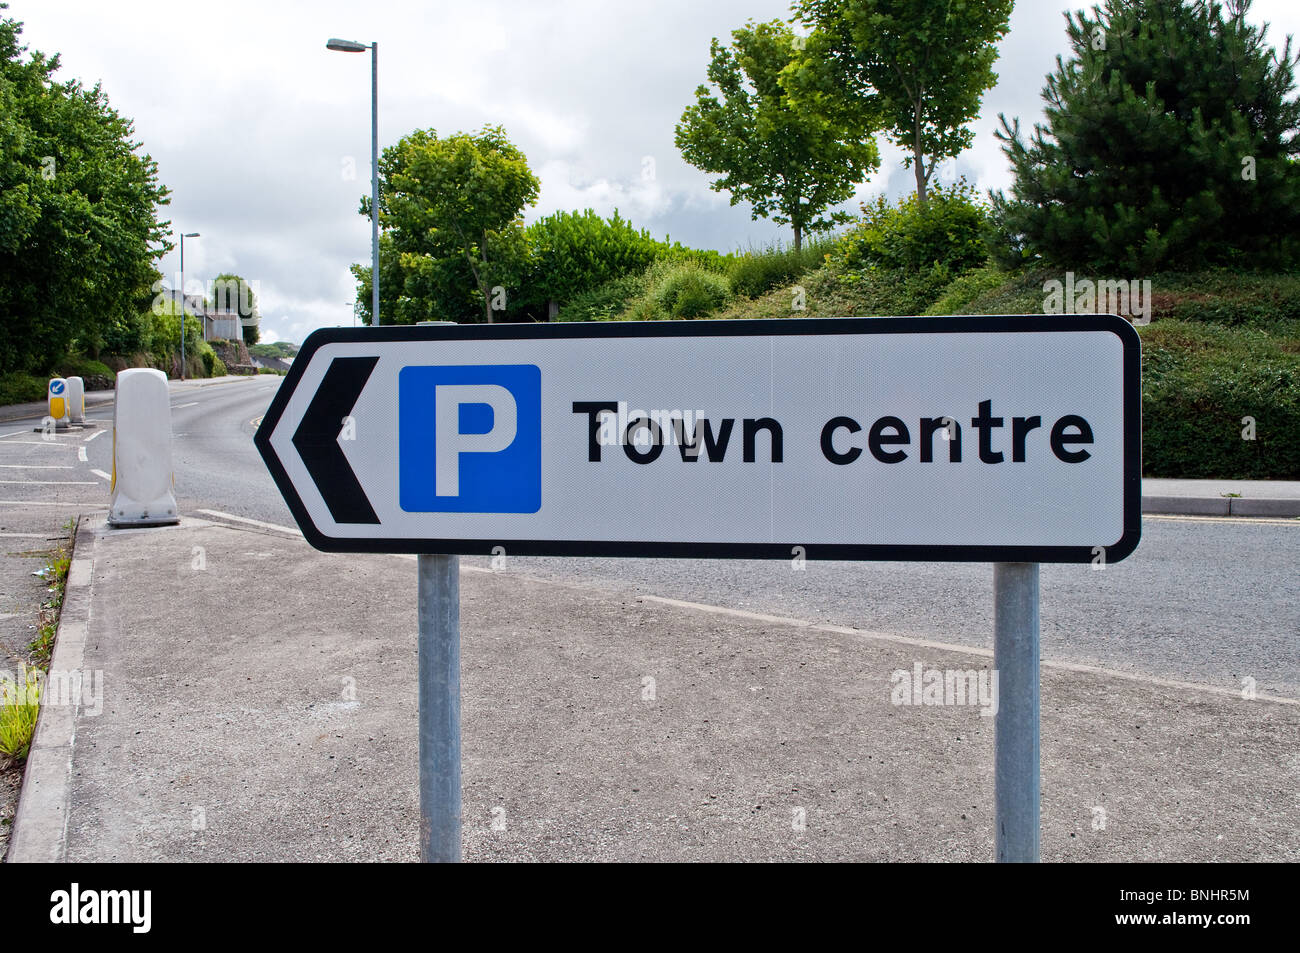 a town centre direction sign in redruth, cornwall, uk Stock Photo